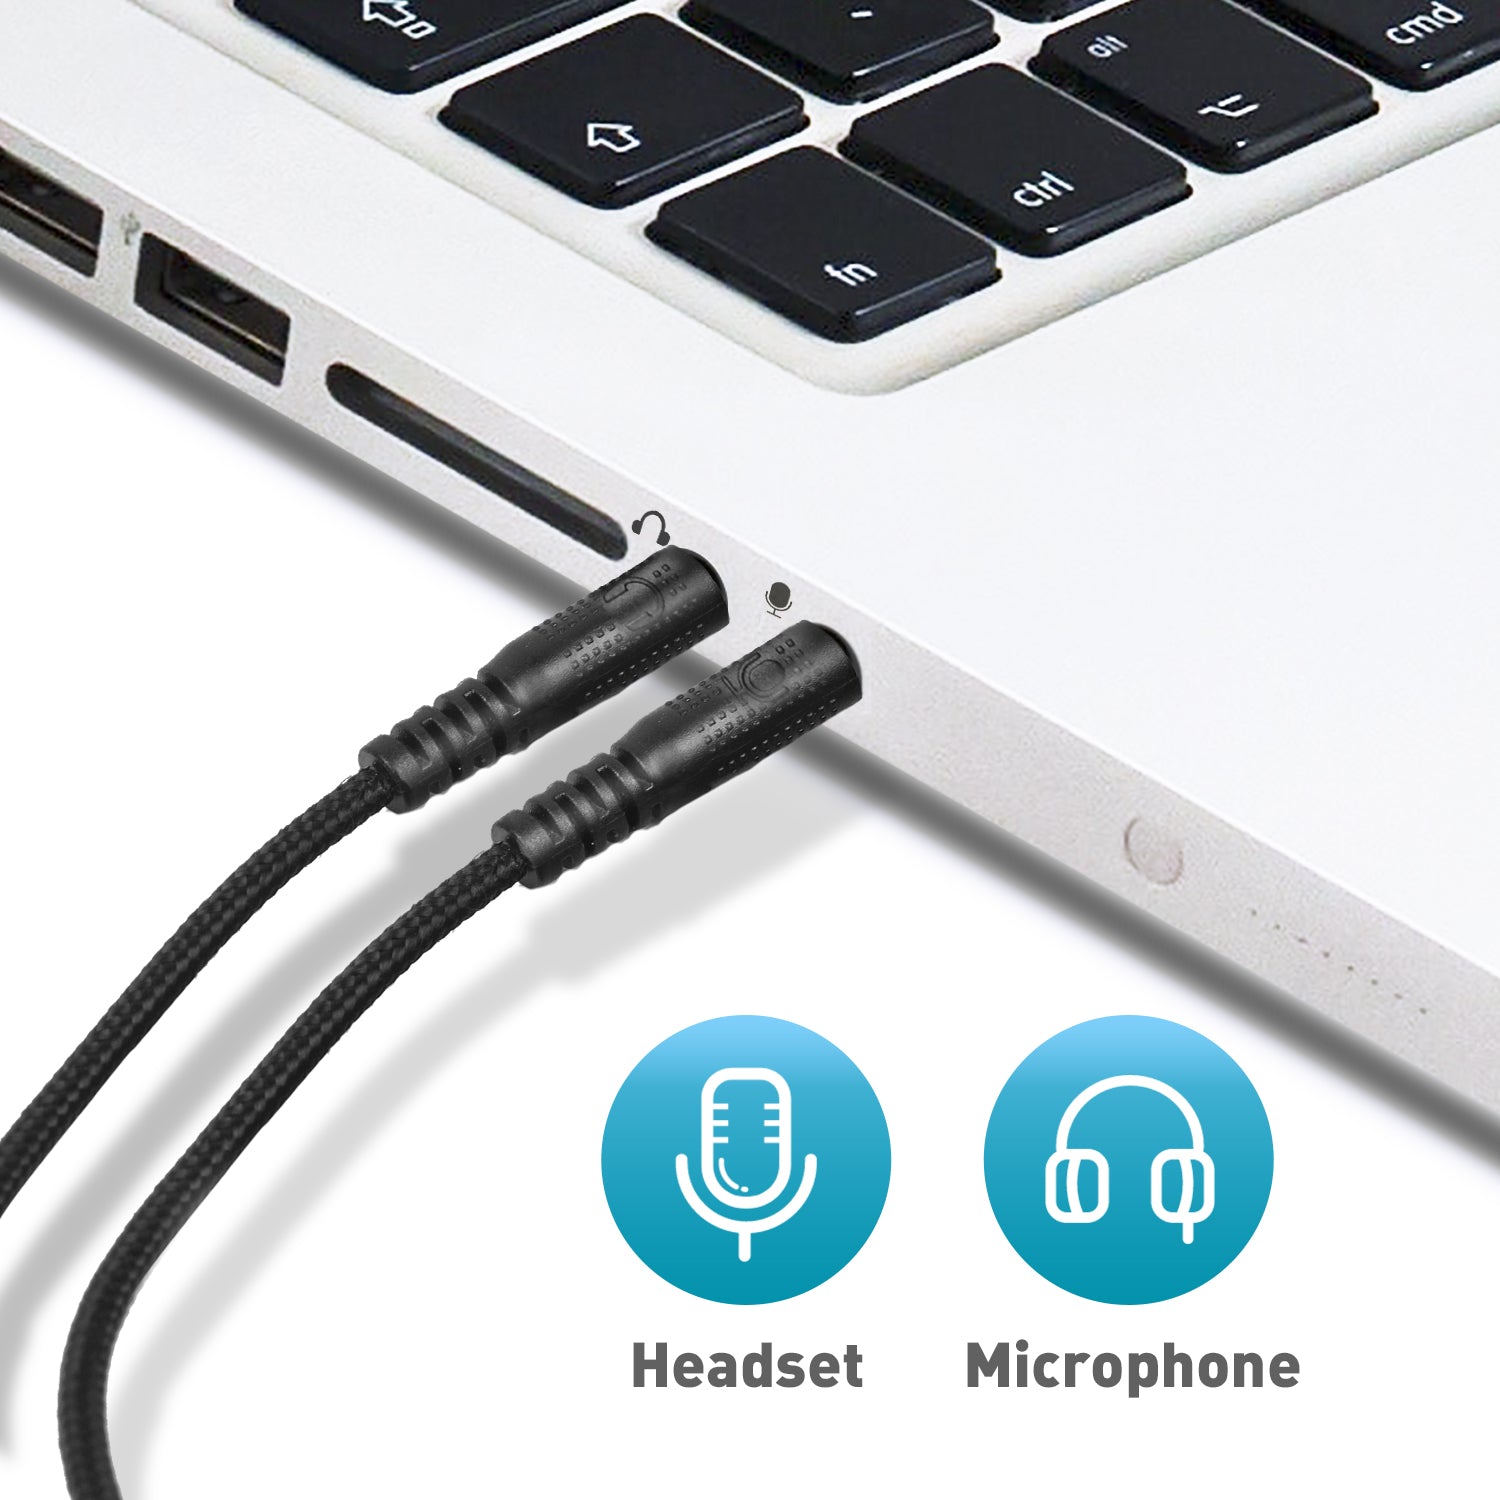 HAVIT 3.5mm Headphone Mic Adapter Cable for Laptop PC, 1 Male To 2 Dual Female Jack